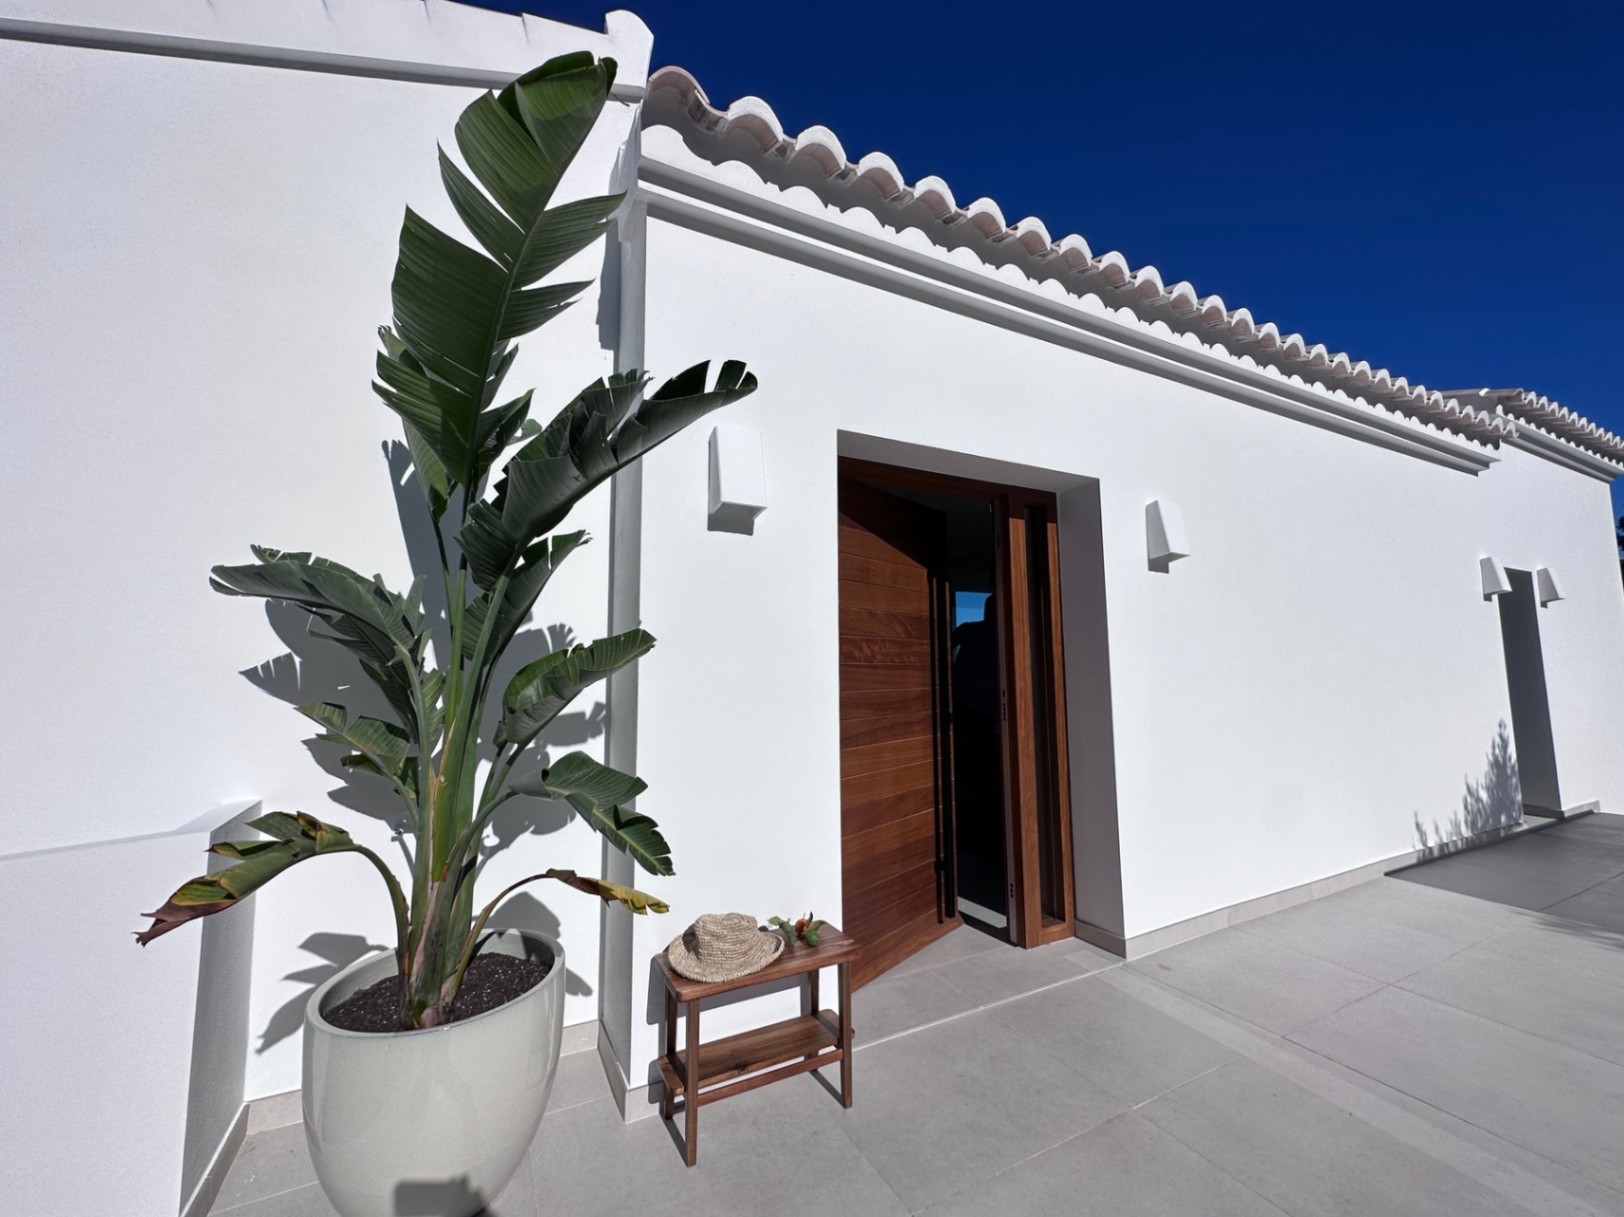 Fully renovated 4 bedroom villa with spectacular views for sale in Javea